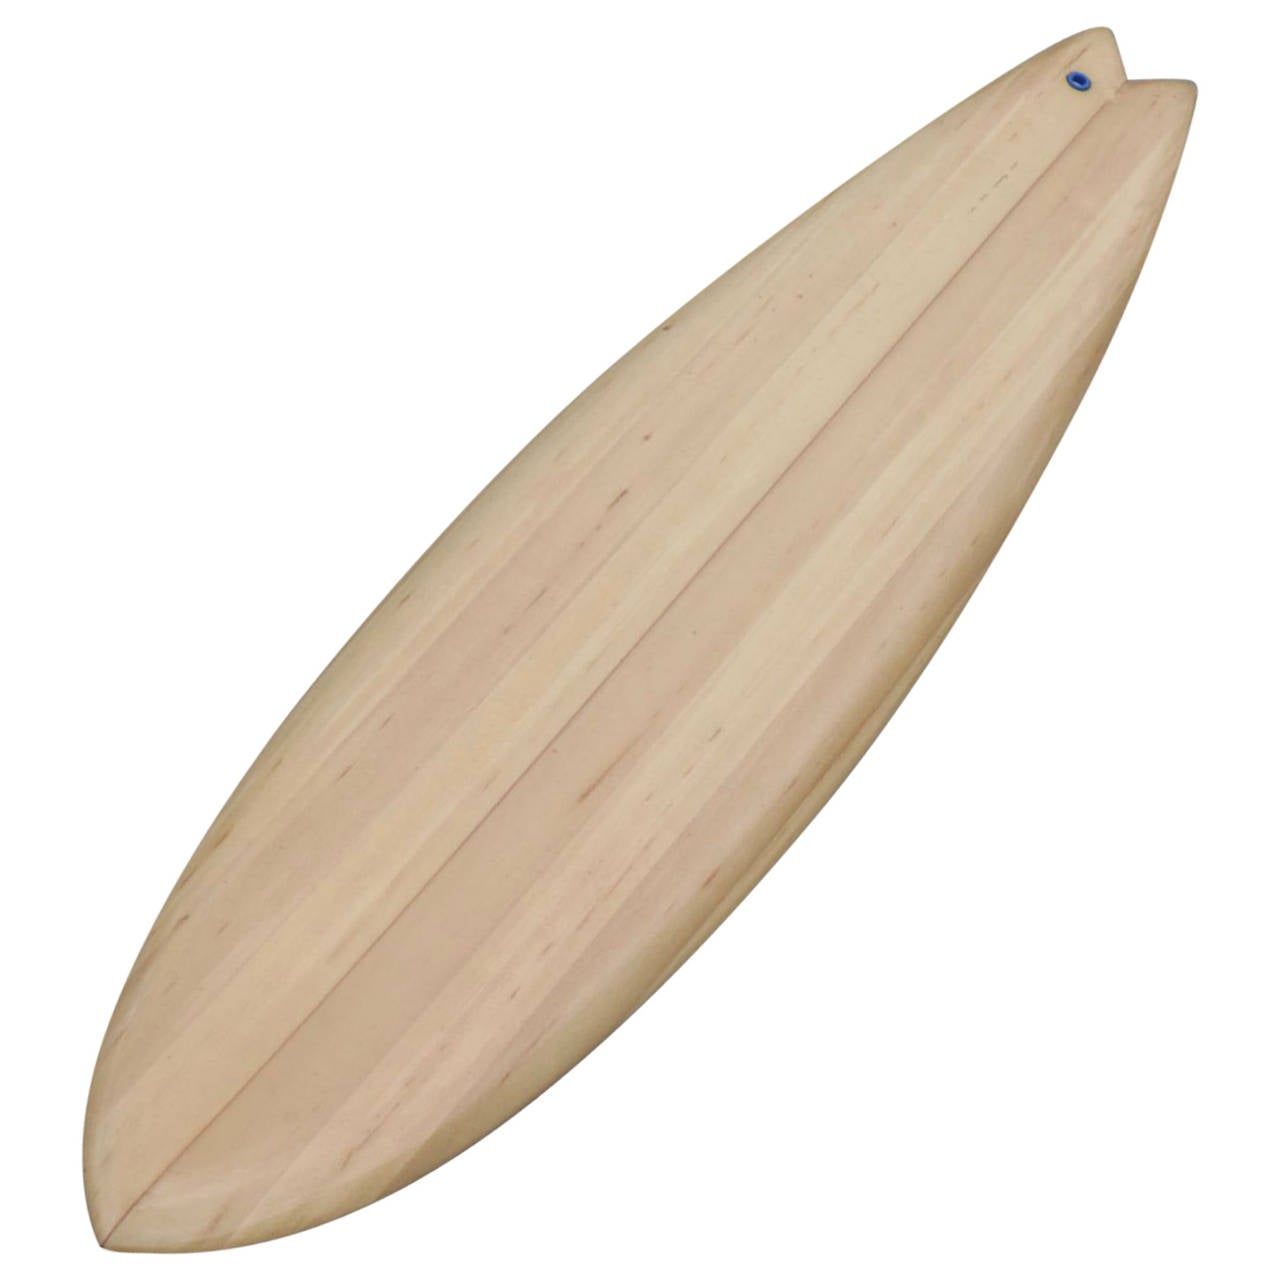 Balsa Wood Surfboards For Sale